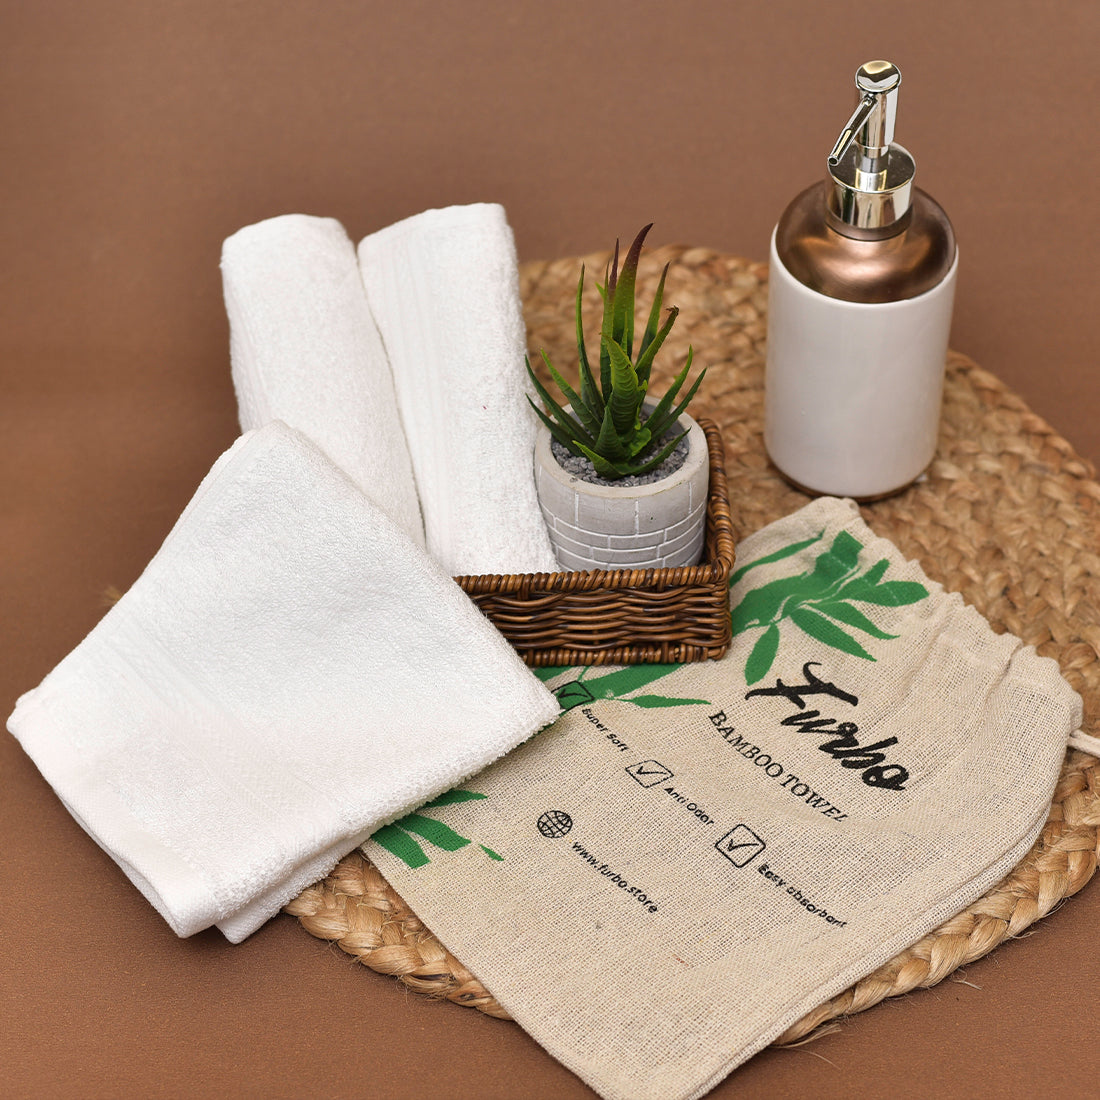 Furbo 100% Bamboo Hand Towel Ultra Absorbent, Soft Feel, Quick Drying & Antibacterial, 600 GSM, 60 cm x 40 cm (Moon White)